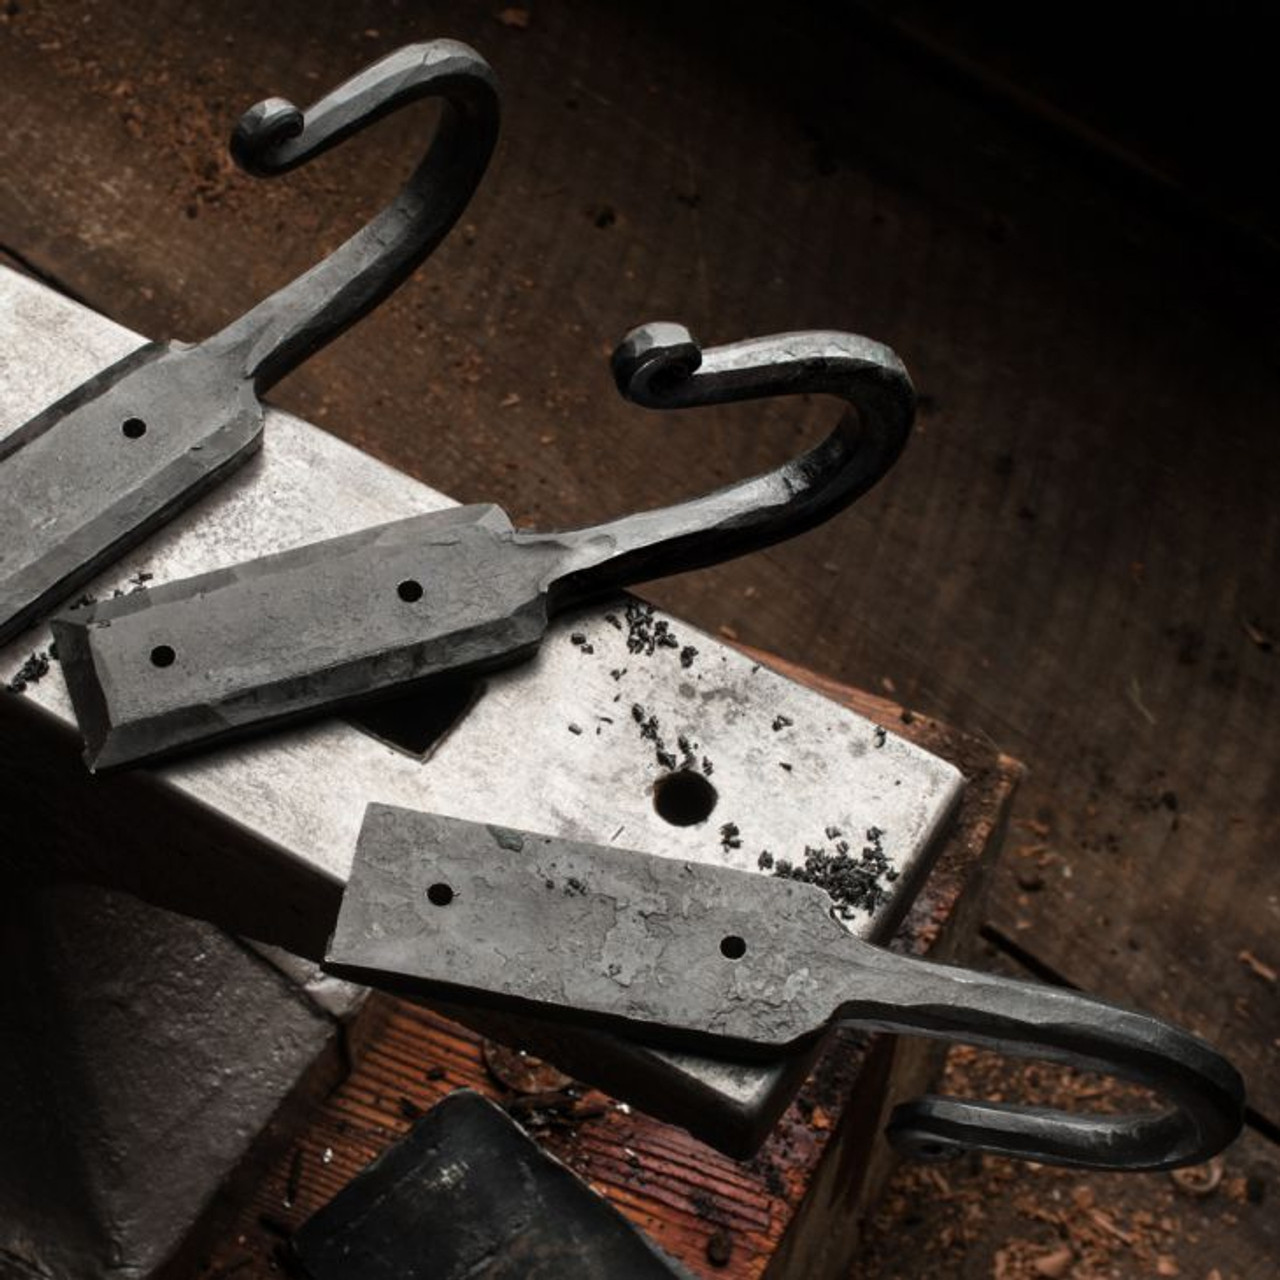 Hand Forged Iron Wall Hooks